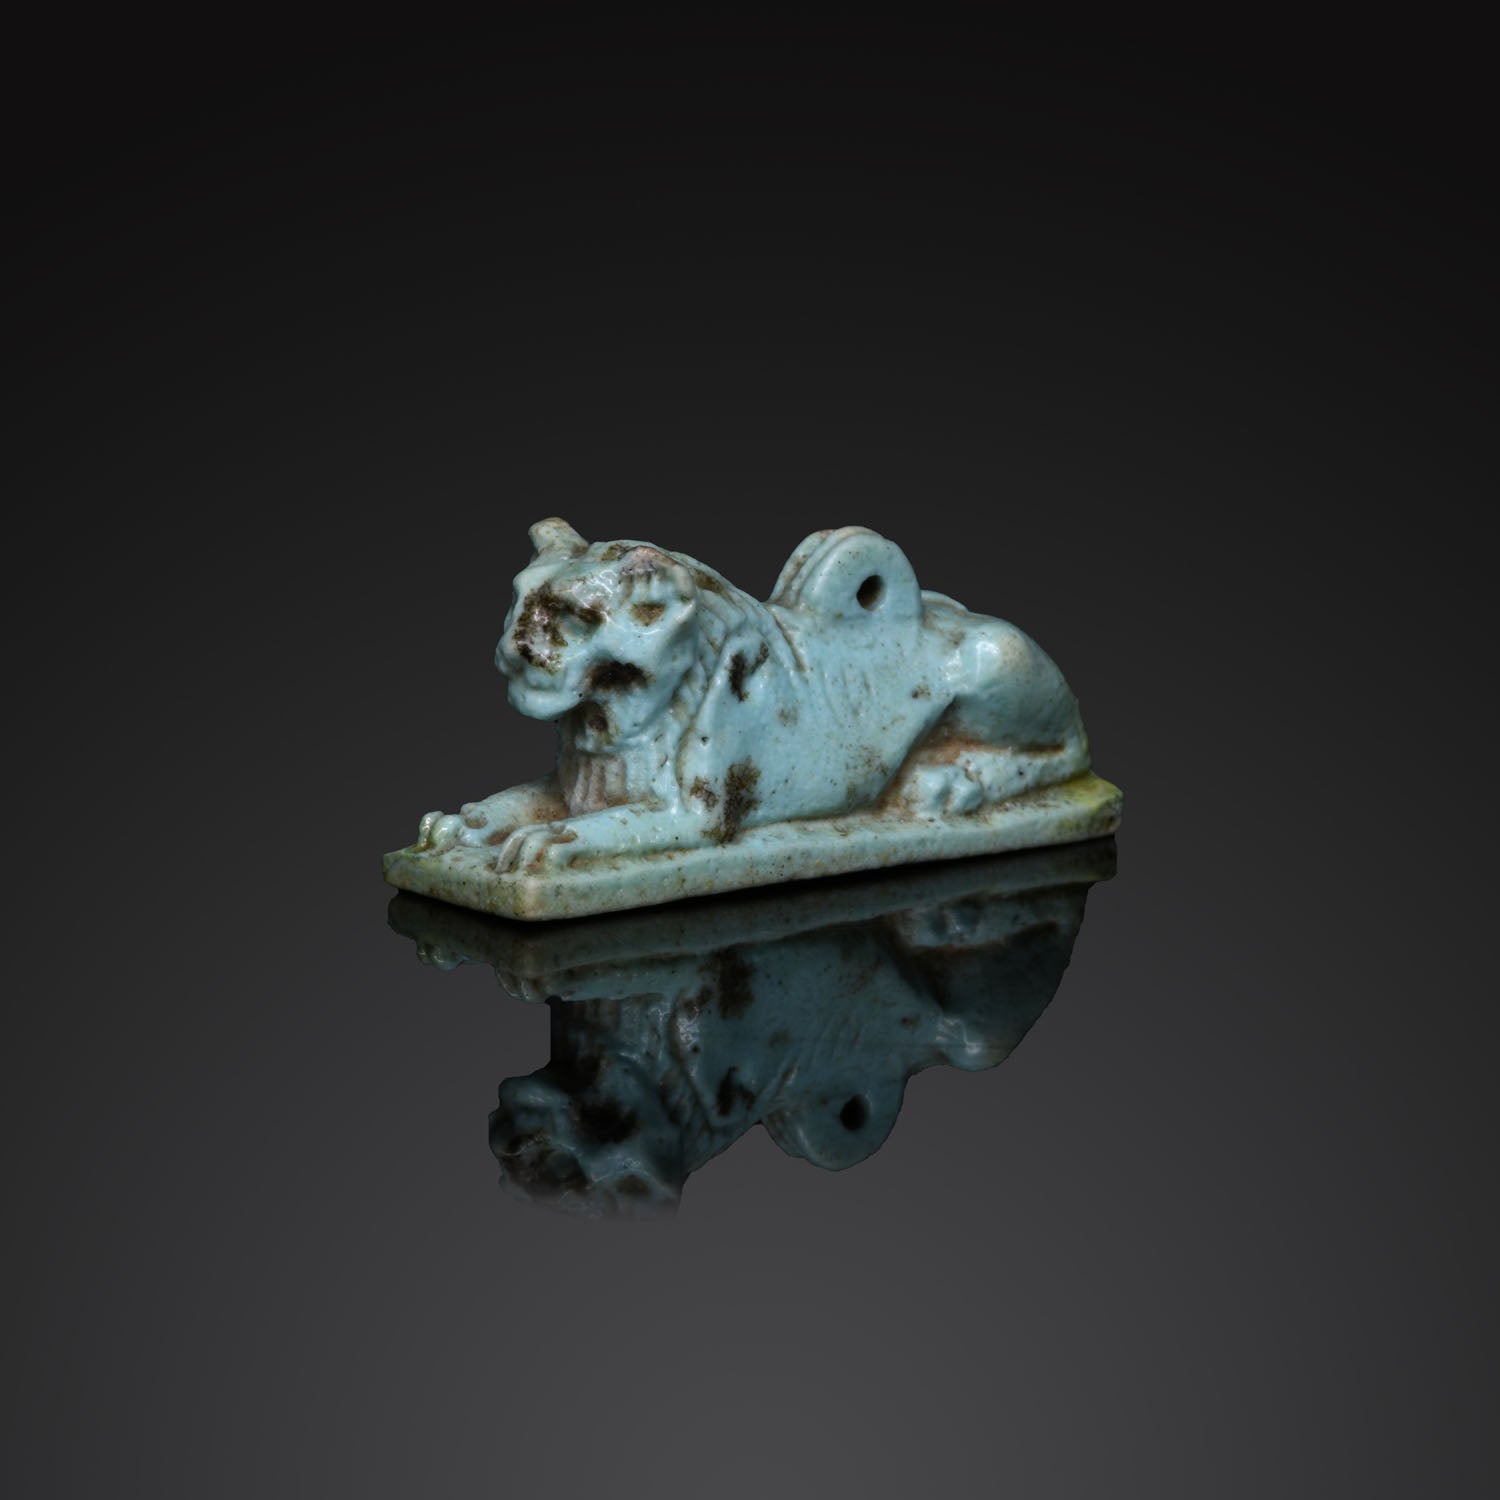 An Egyptian Faience Amulet of a Recumbent Lion, Ptolemaic Period, ca. 332 - 30 BCE